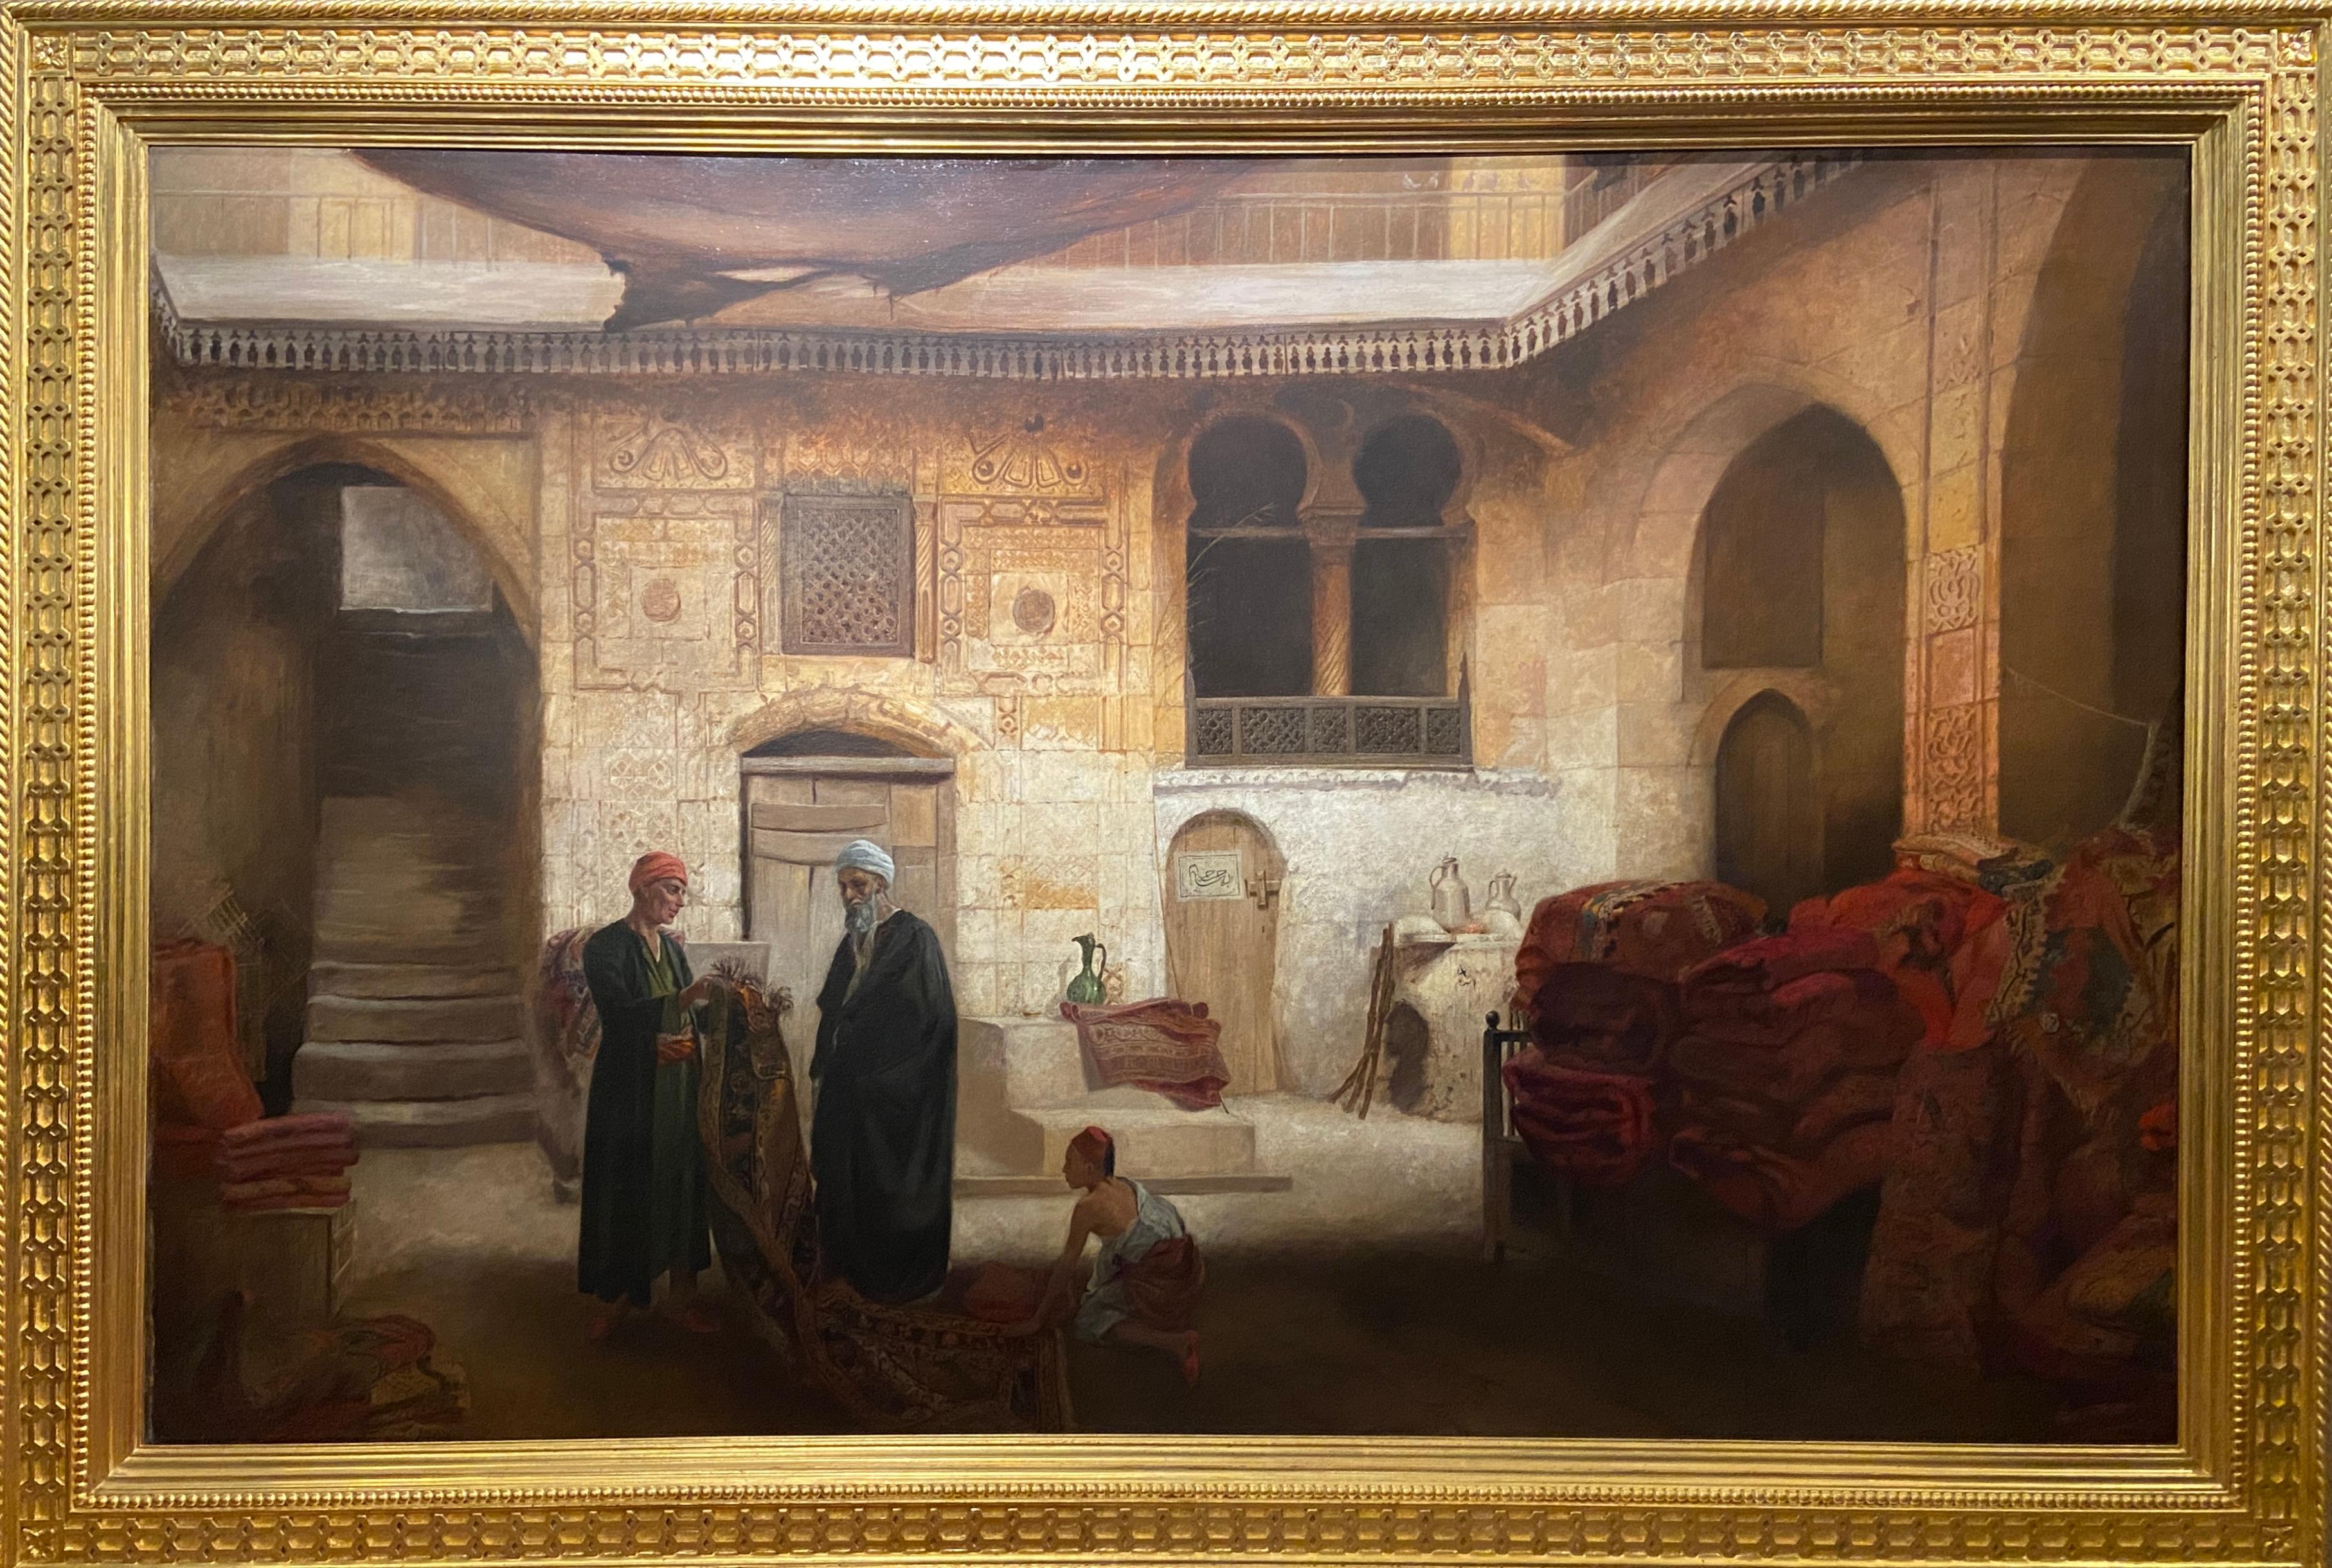 Oil on canvas, signed and dated '1879' bottom right
Image size: 38 x 59 1/2 inches (96.5 x 151 cm)
Ornate Orientalist style gilt frame

Carl Werner

Carl Friedrich Heinrich Werner was born in Weimar in 1808, the son of a piano teacher and a singer.